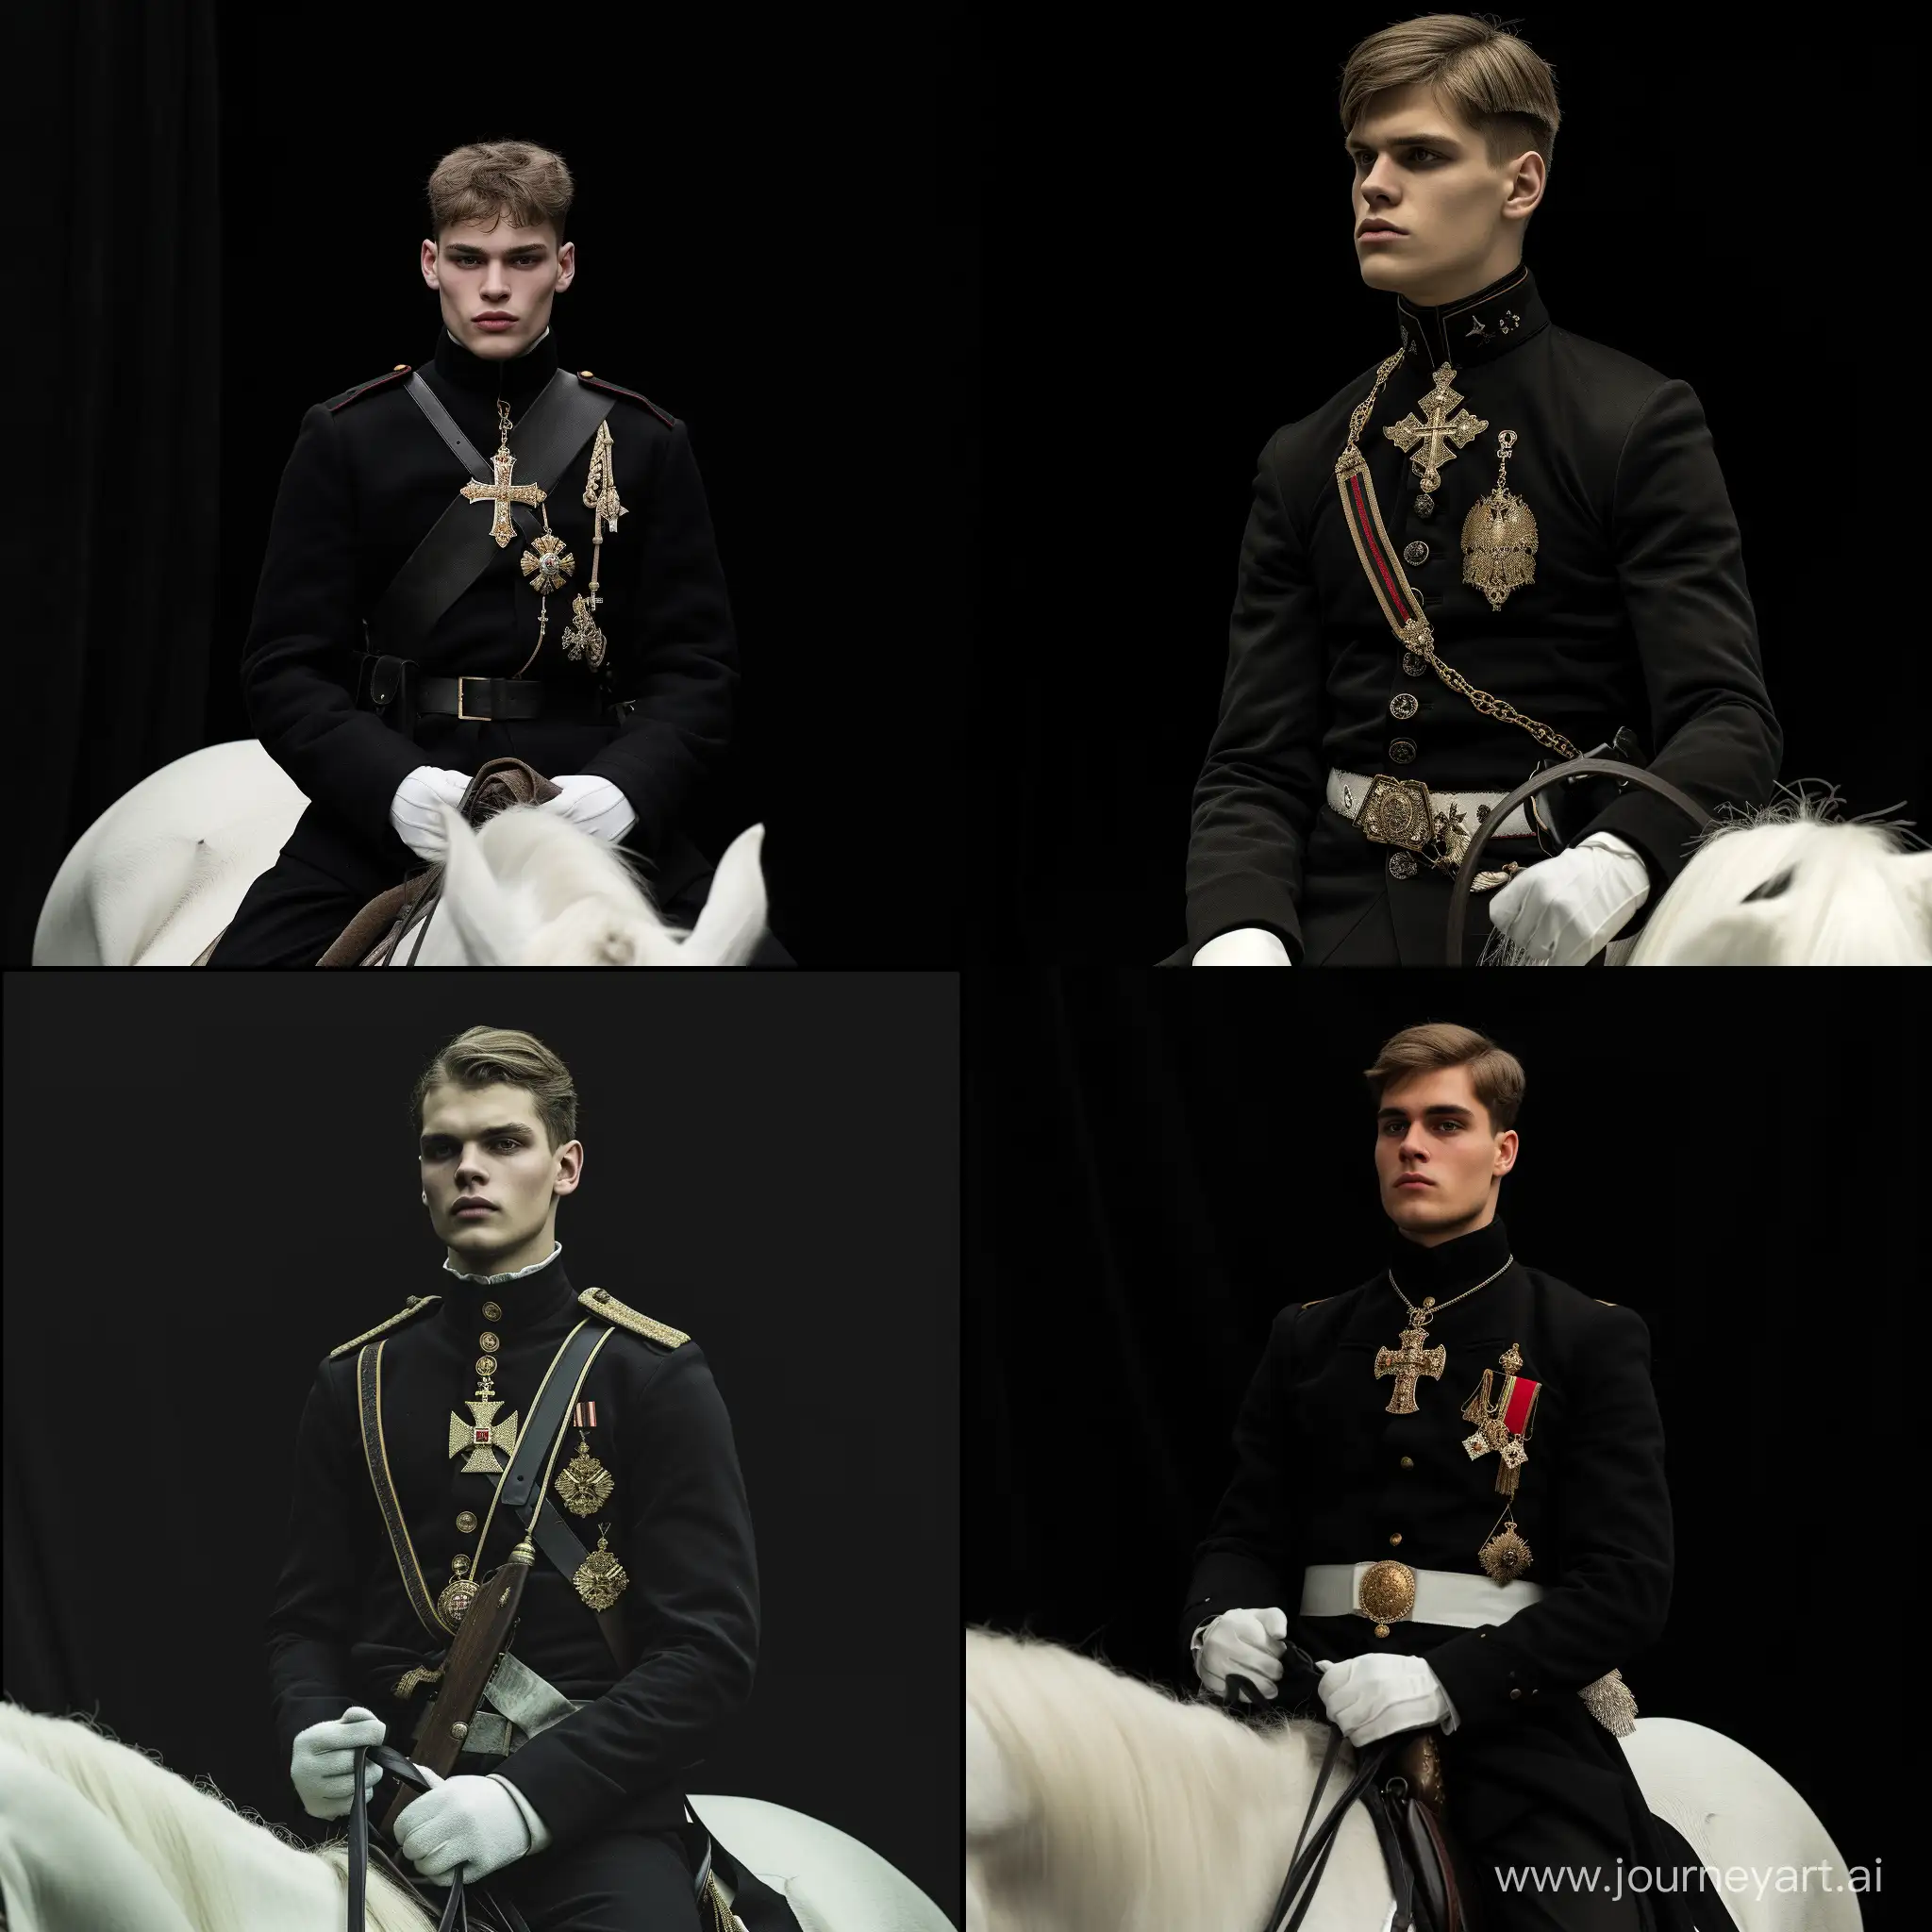 Young-Officer-in-Ceremonial-Uniform-Riding-White-Horse-with-Sable